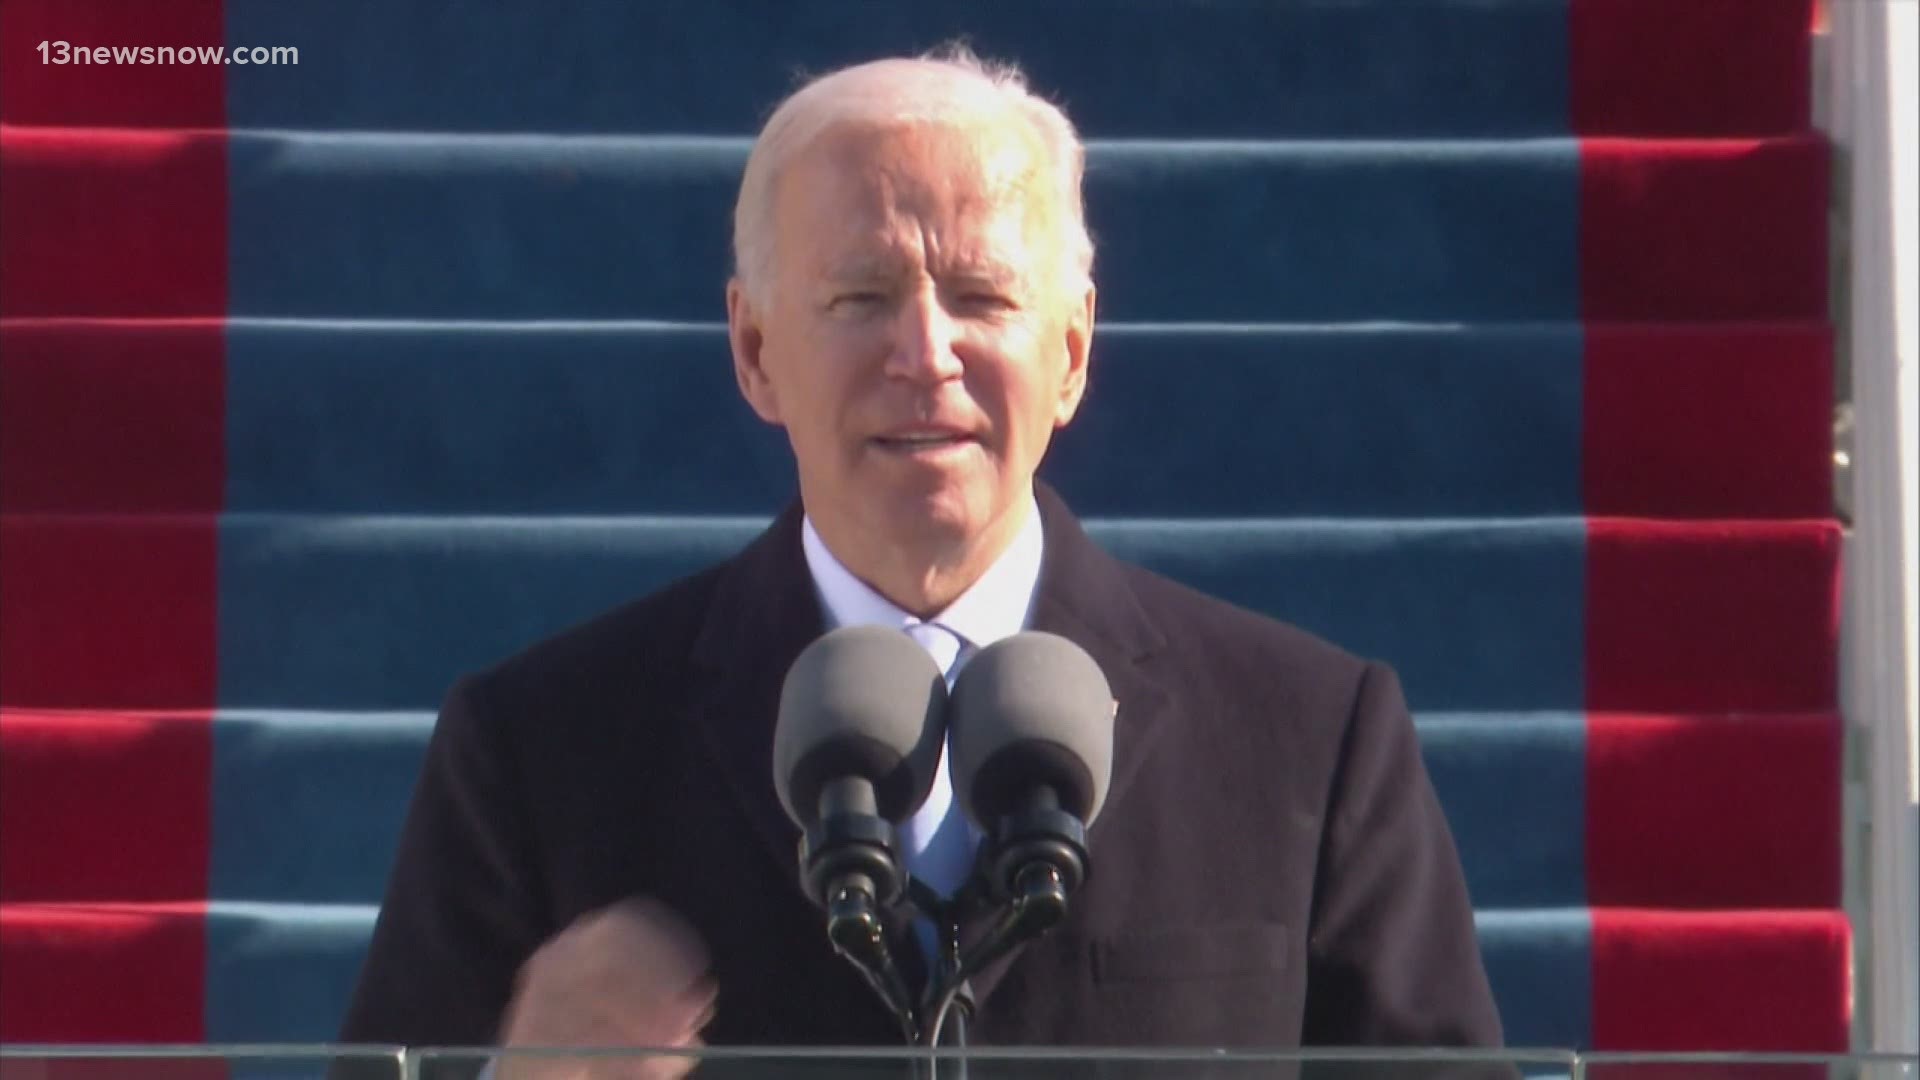 At the inauguration, President Biden made it clear how torn the nation is and the enormous challenge facing the nation to heal and to build that more perfect union.